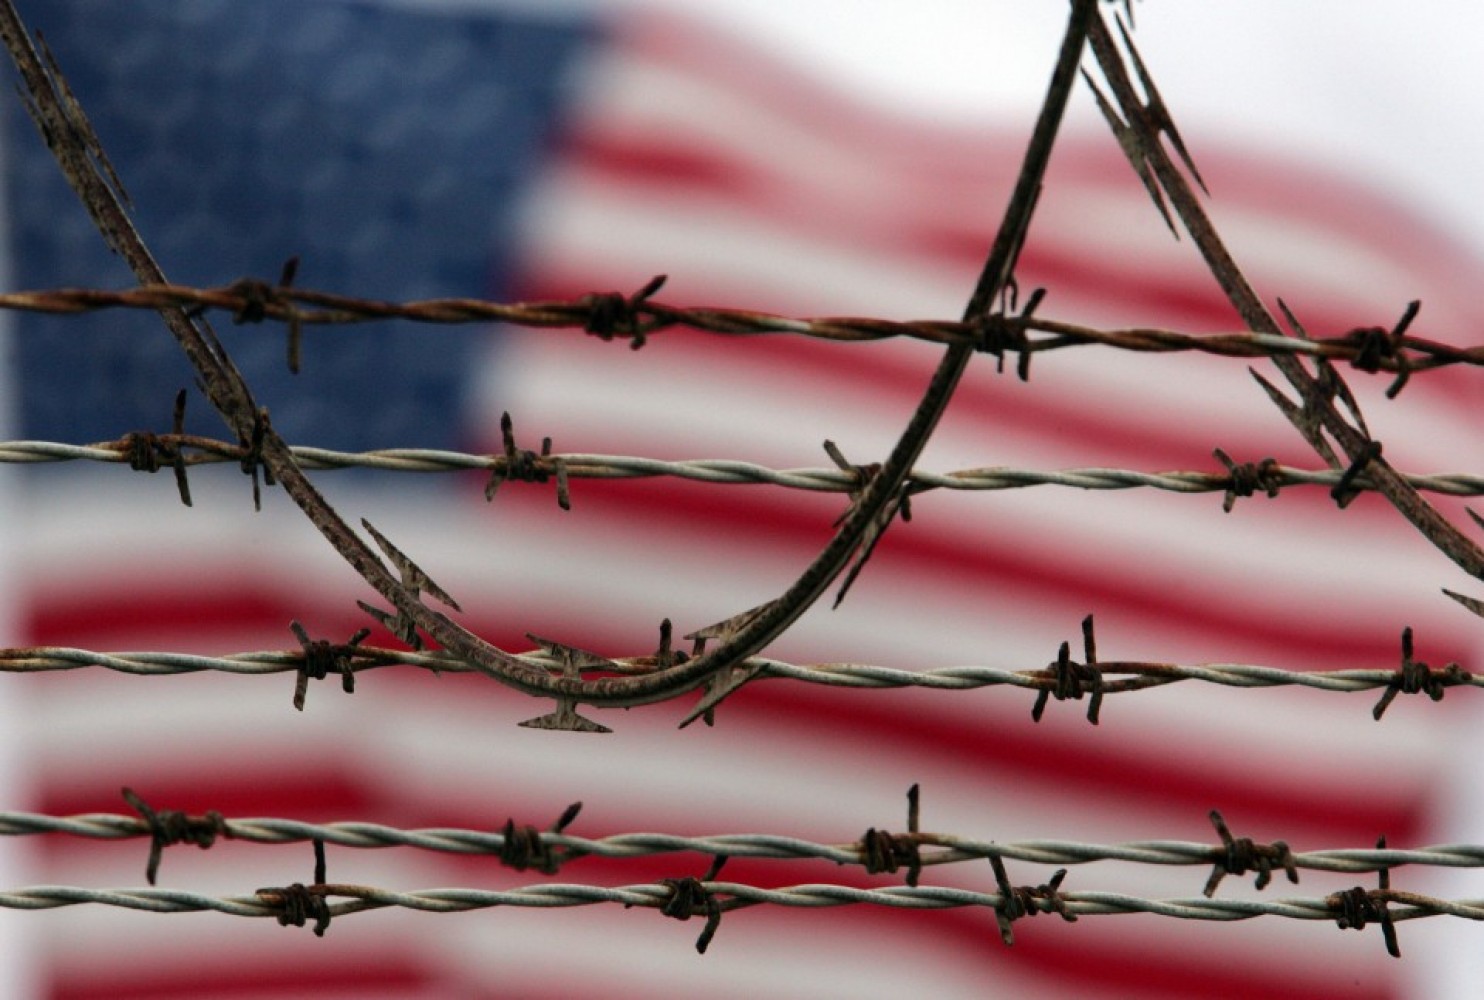  More Americans support torture than Afghans, Iraqis and South Sudanese. Why? 